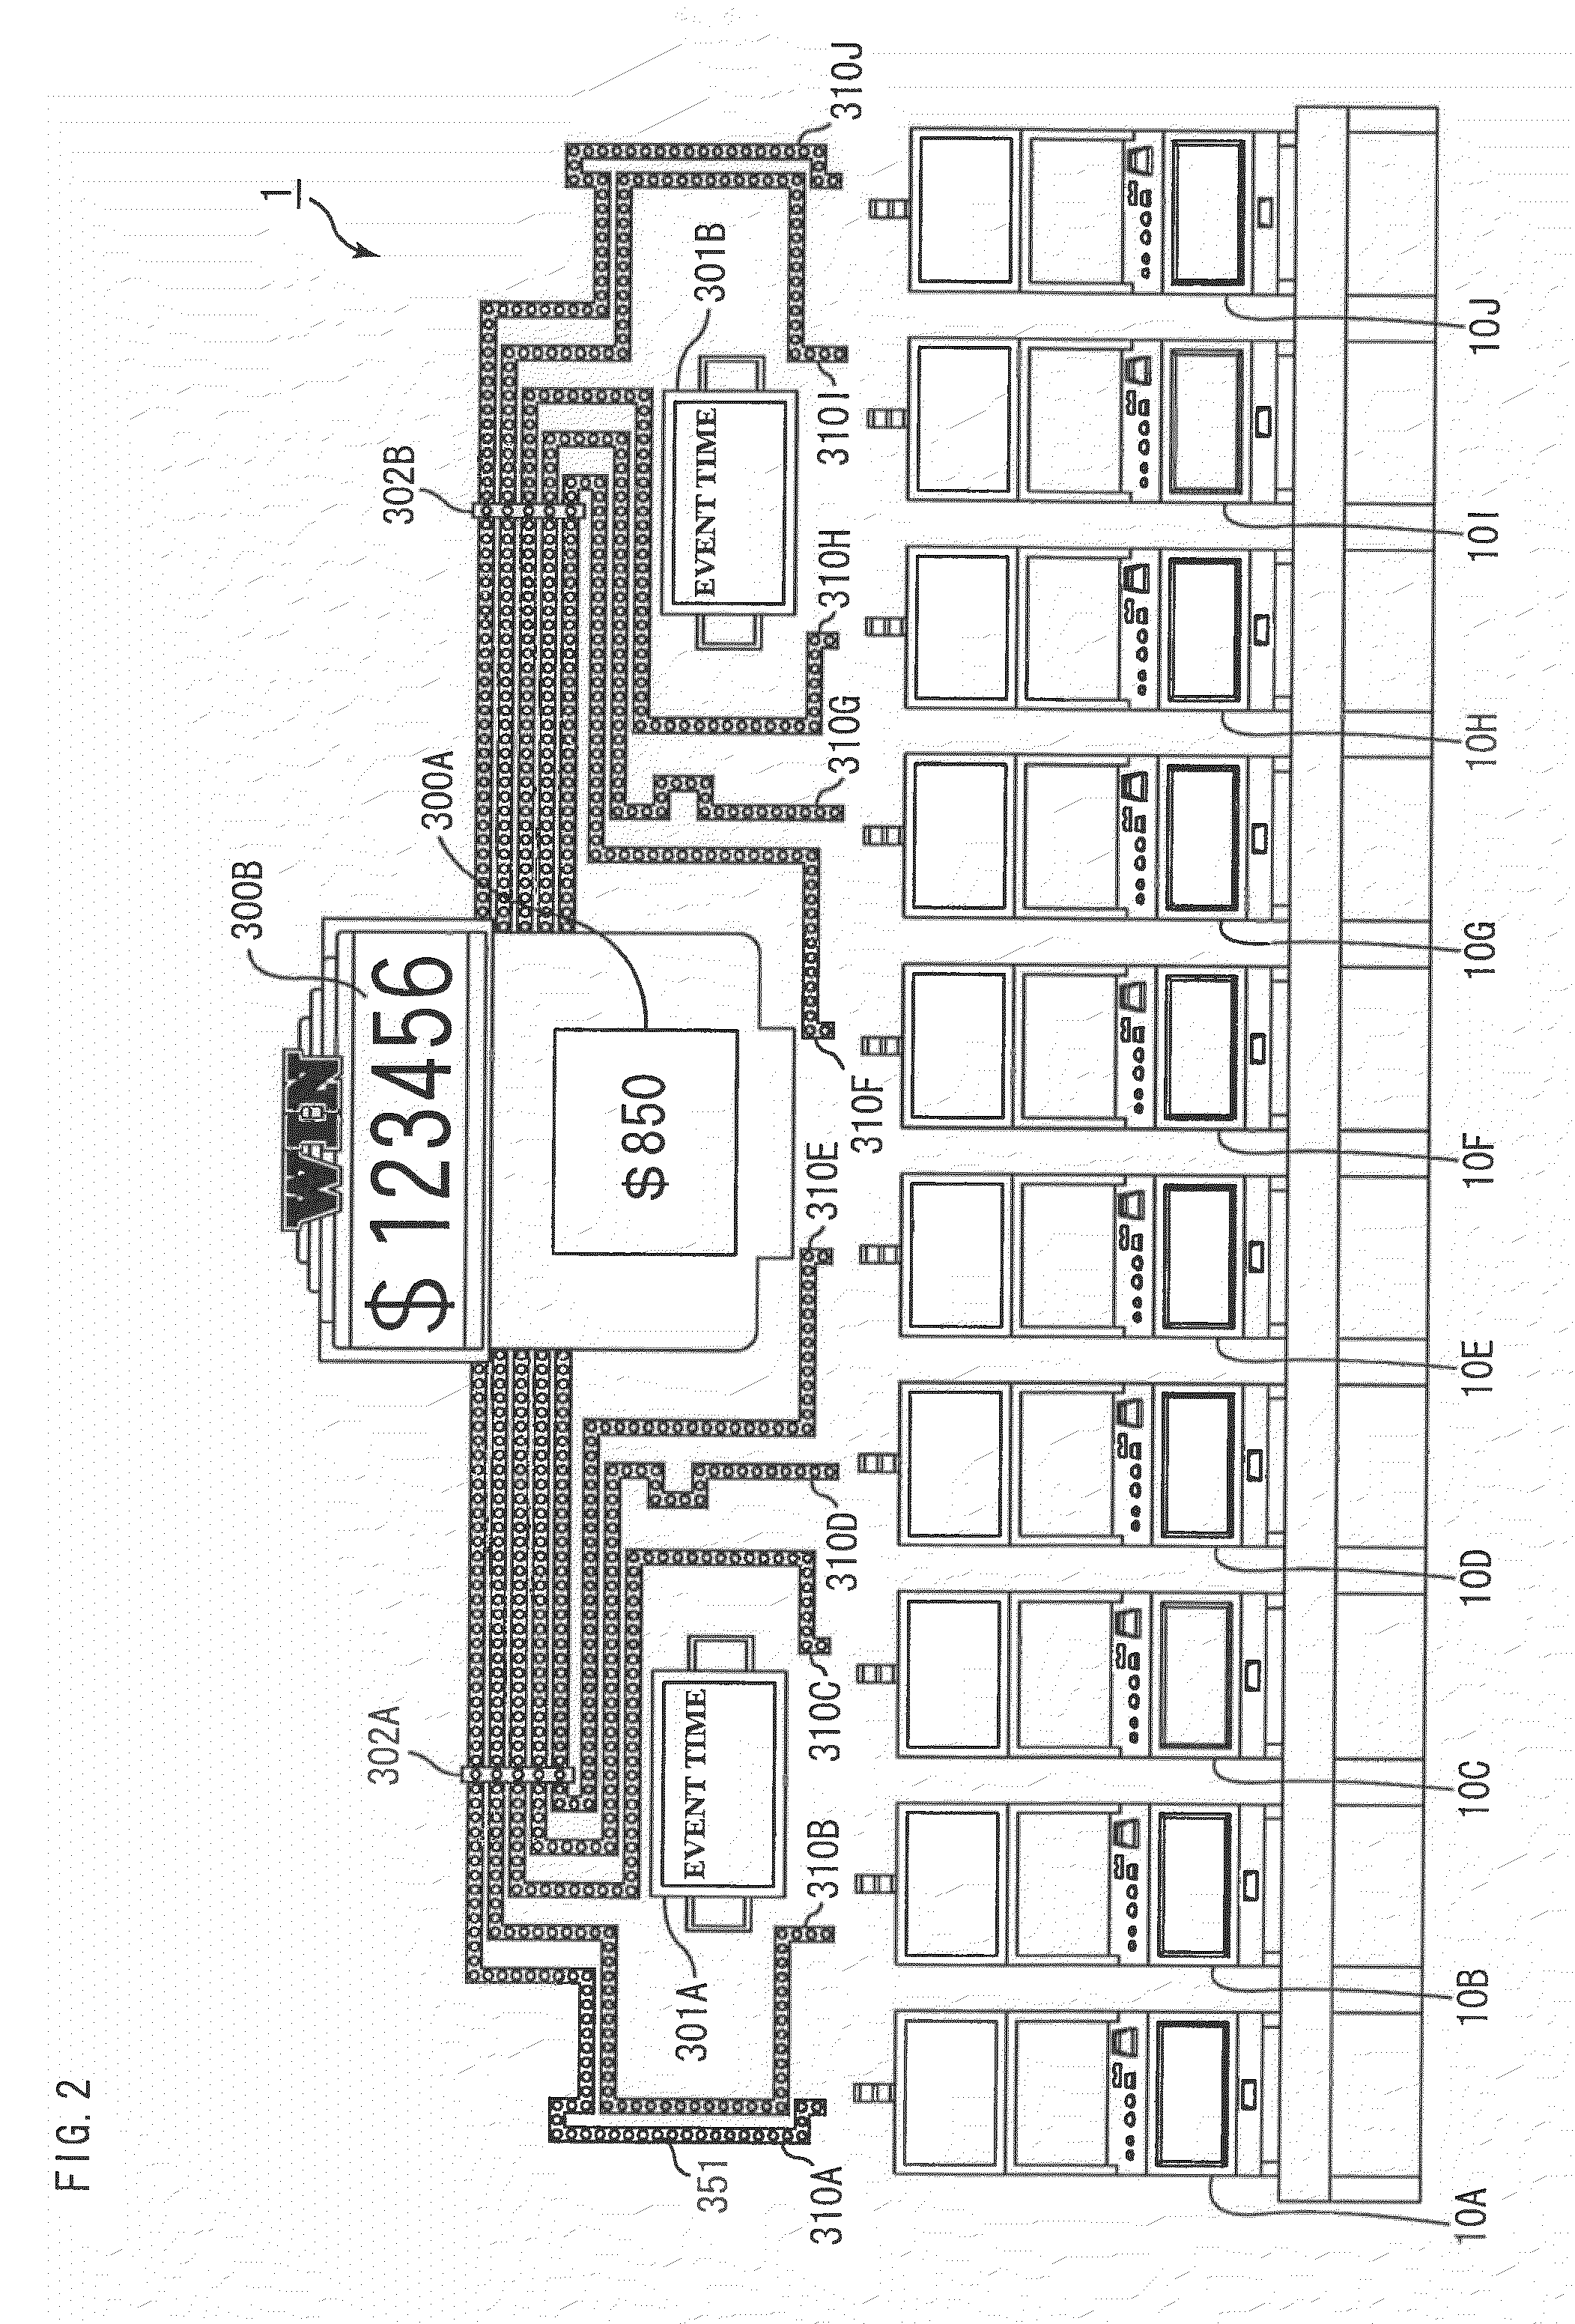 Currency value changing apparatus enabling player to play game using various currencies, gaming system where player can play game using various currencies, individual tracking apparatus, and individual tracking system